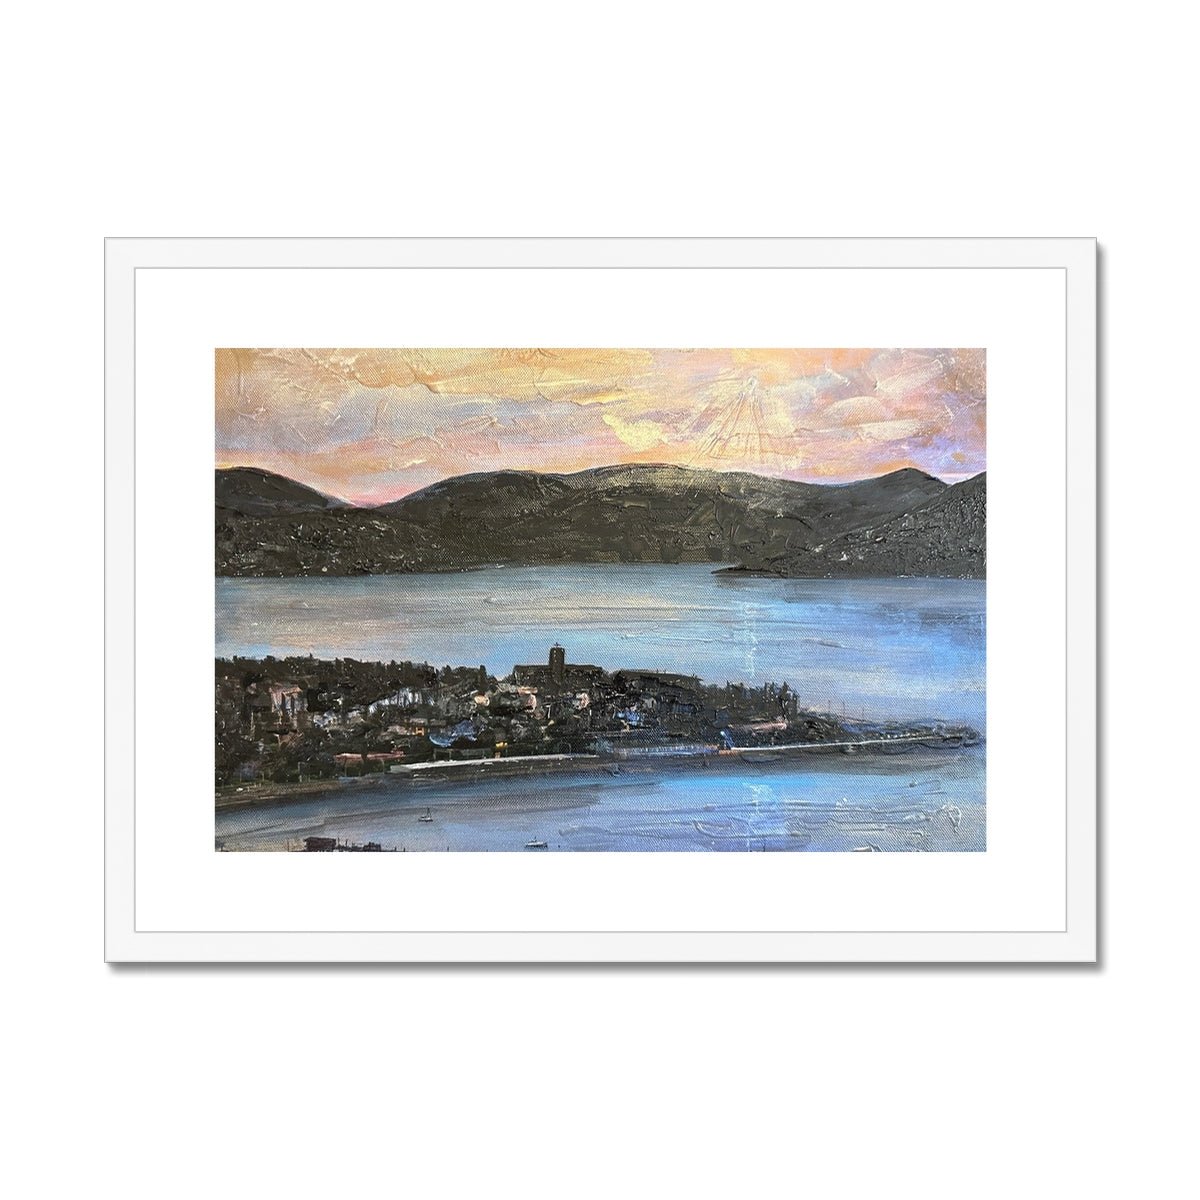 From Lyle Hill Painting | Framed & Mounted Prints From Scotland-Framed & Mounted Prints-River Clyde Art Gallery-A2 Landscape-White Frame-Paintings, Prints, Homeware, Art Gifts From Scotland By Scottish Artist Kevin Hunter